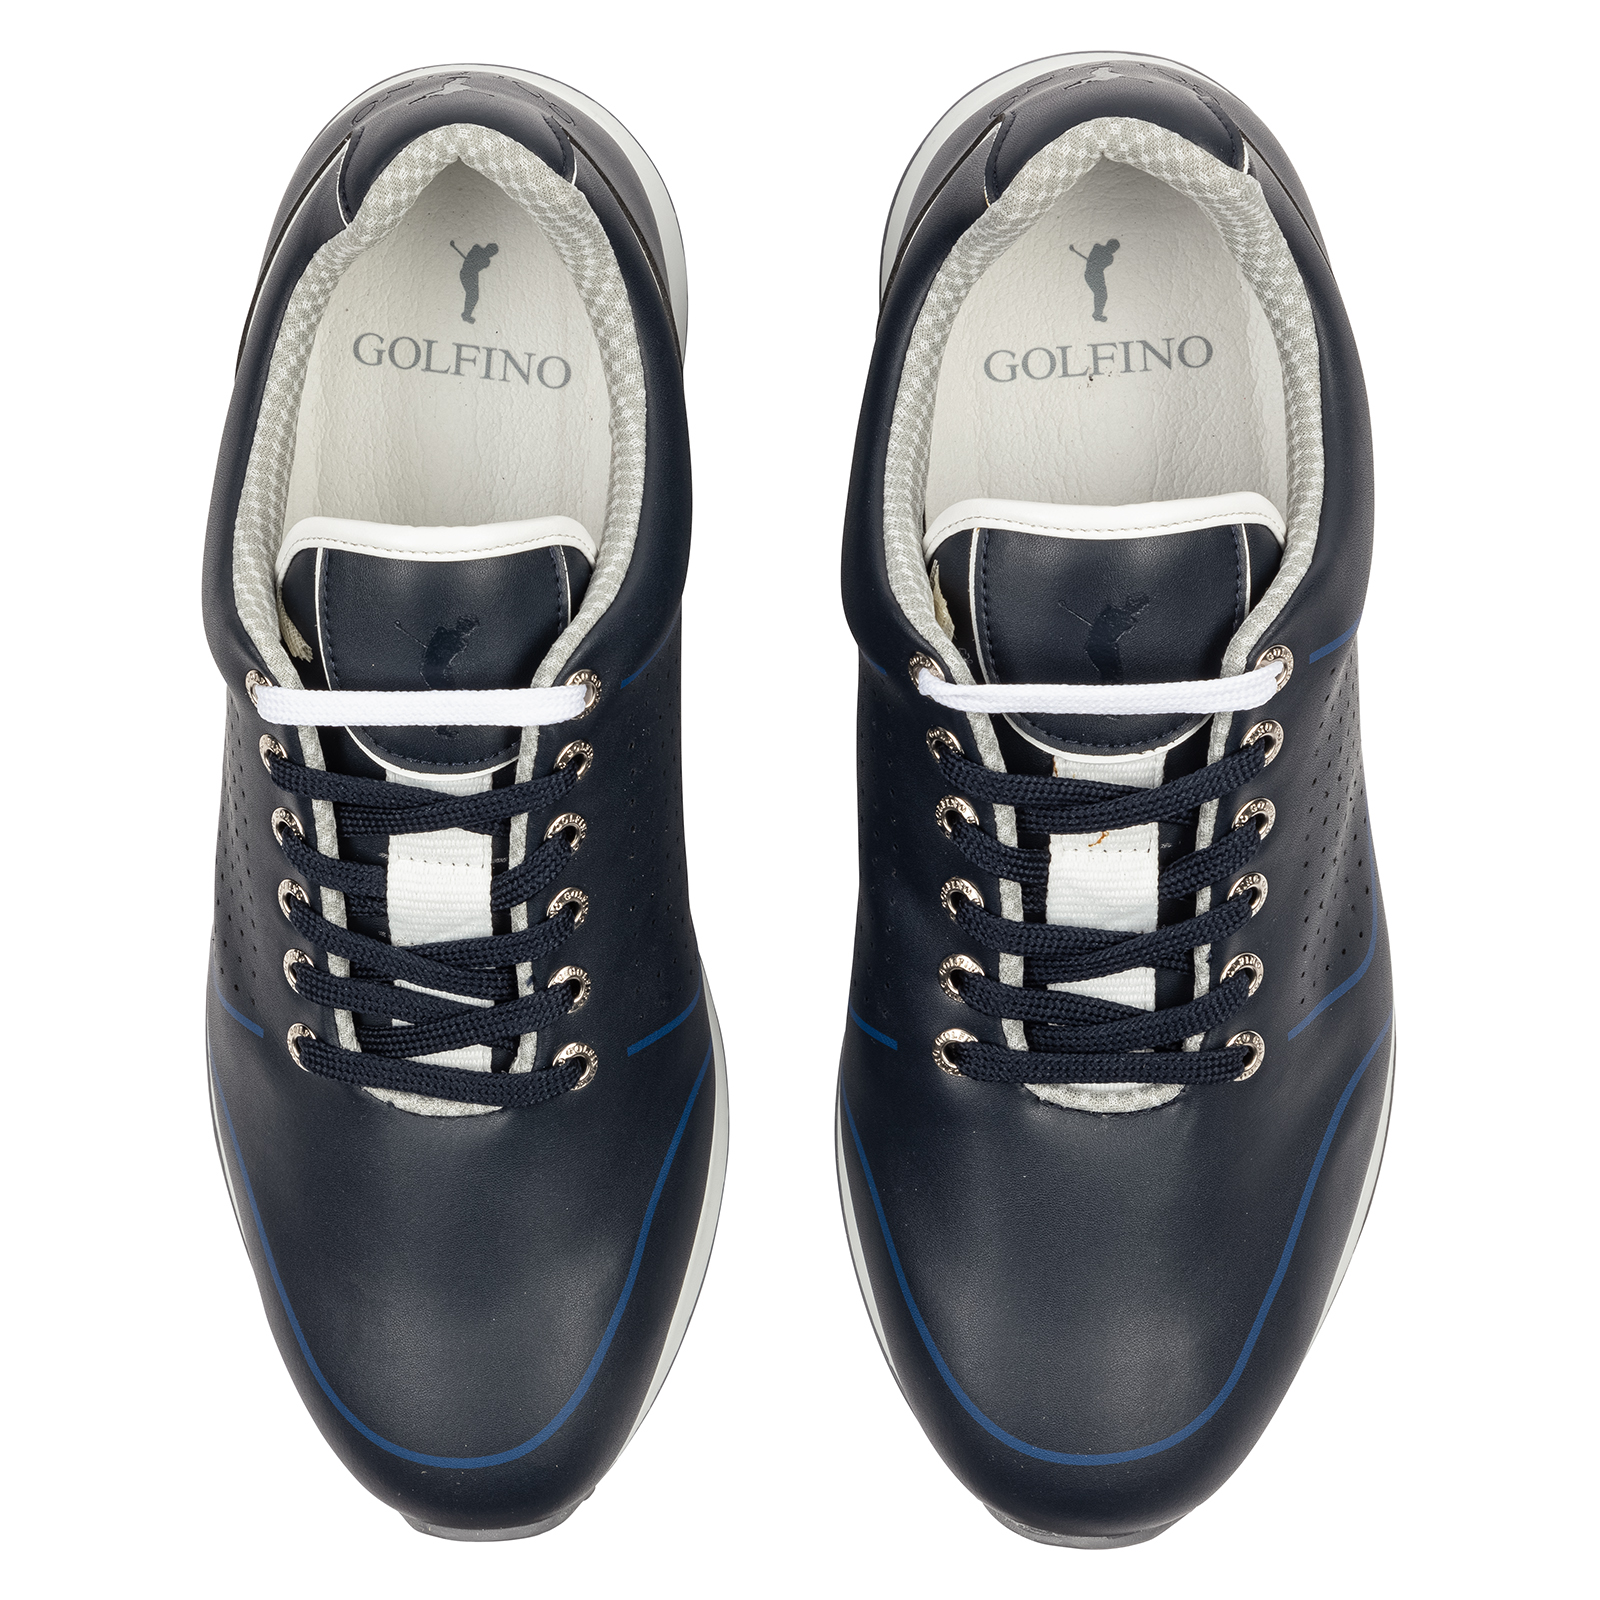 Sporty men's golf shoes made from easy to care for vegan leather